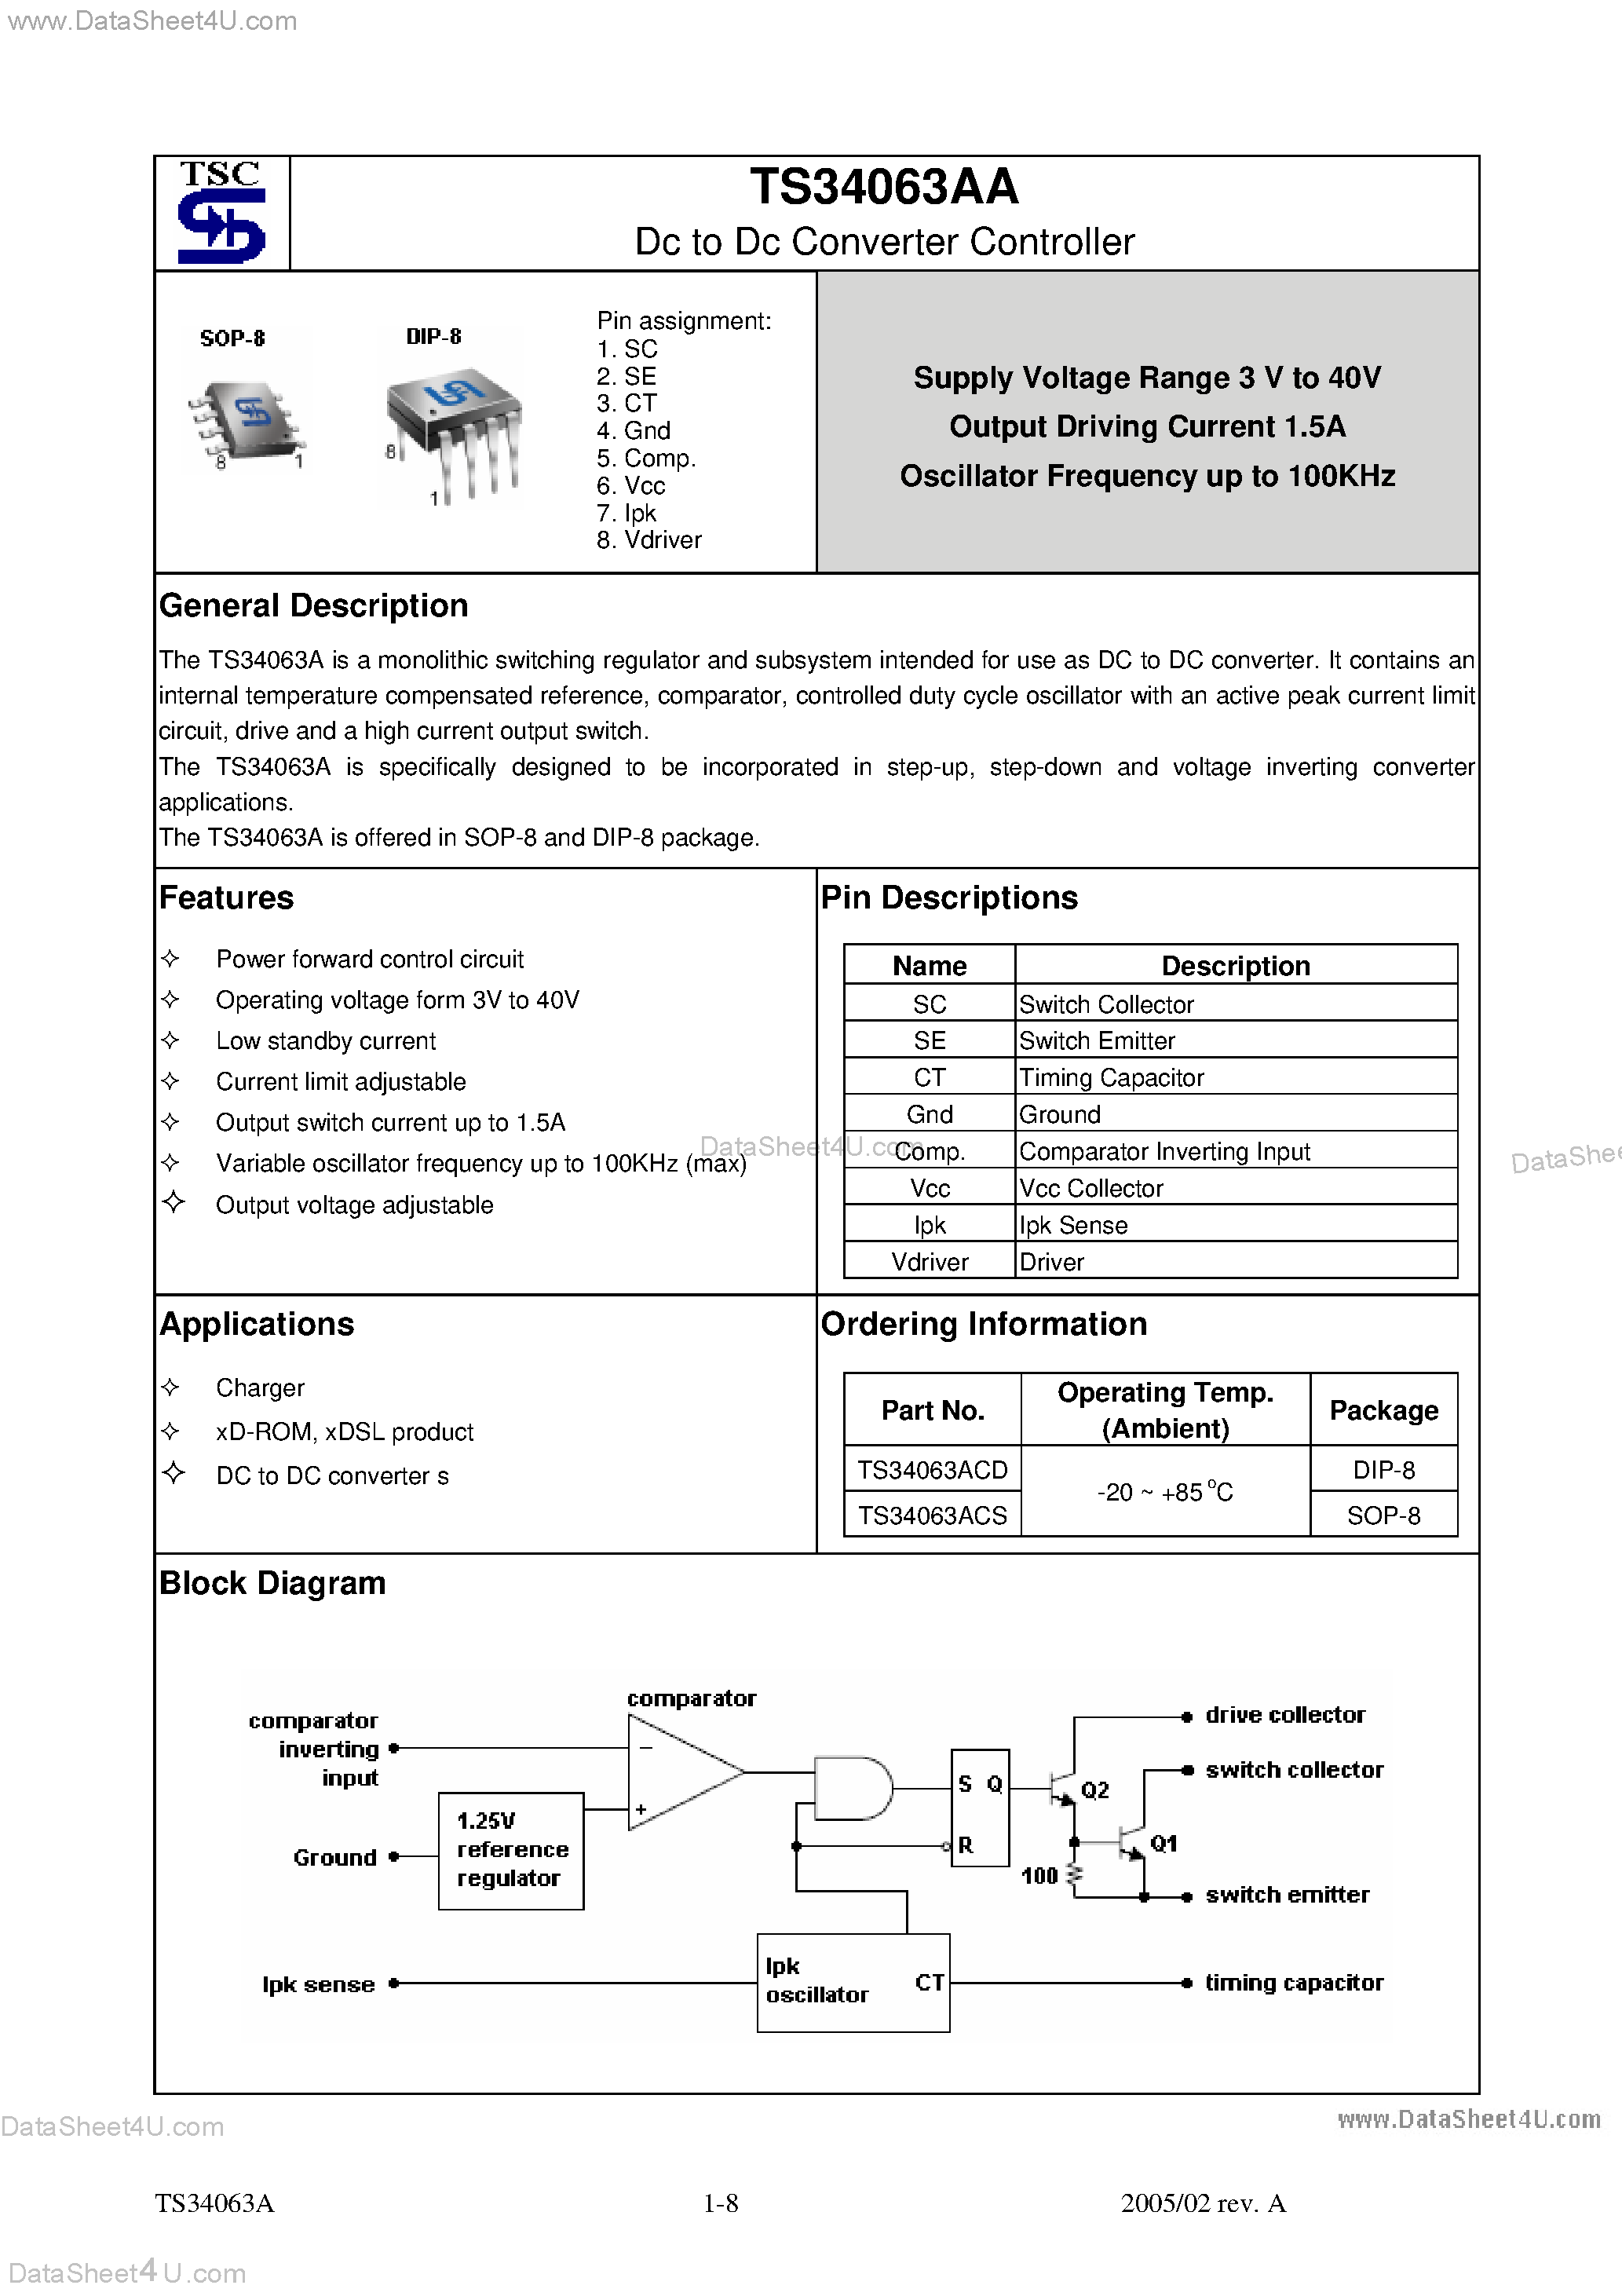 Datasheet TS34063AA - Dc to Dc Converter Controller page 1